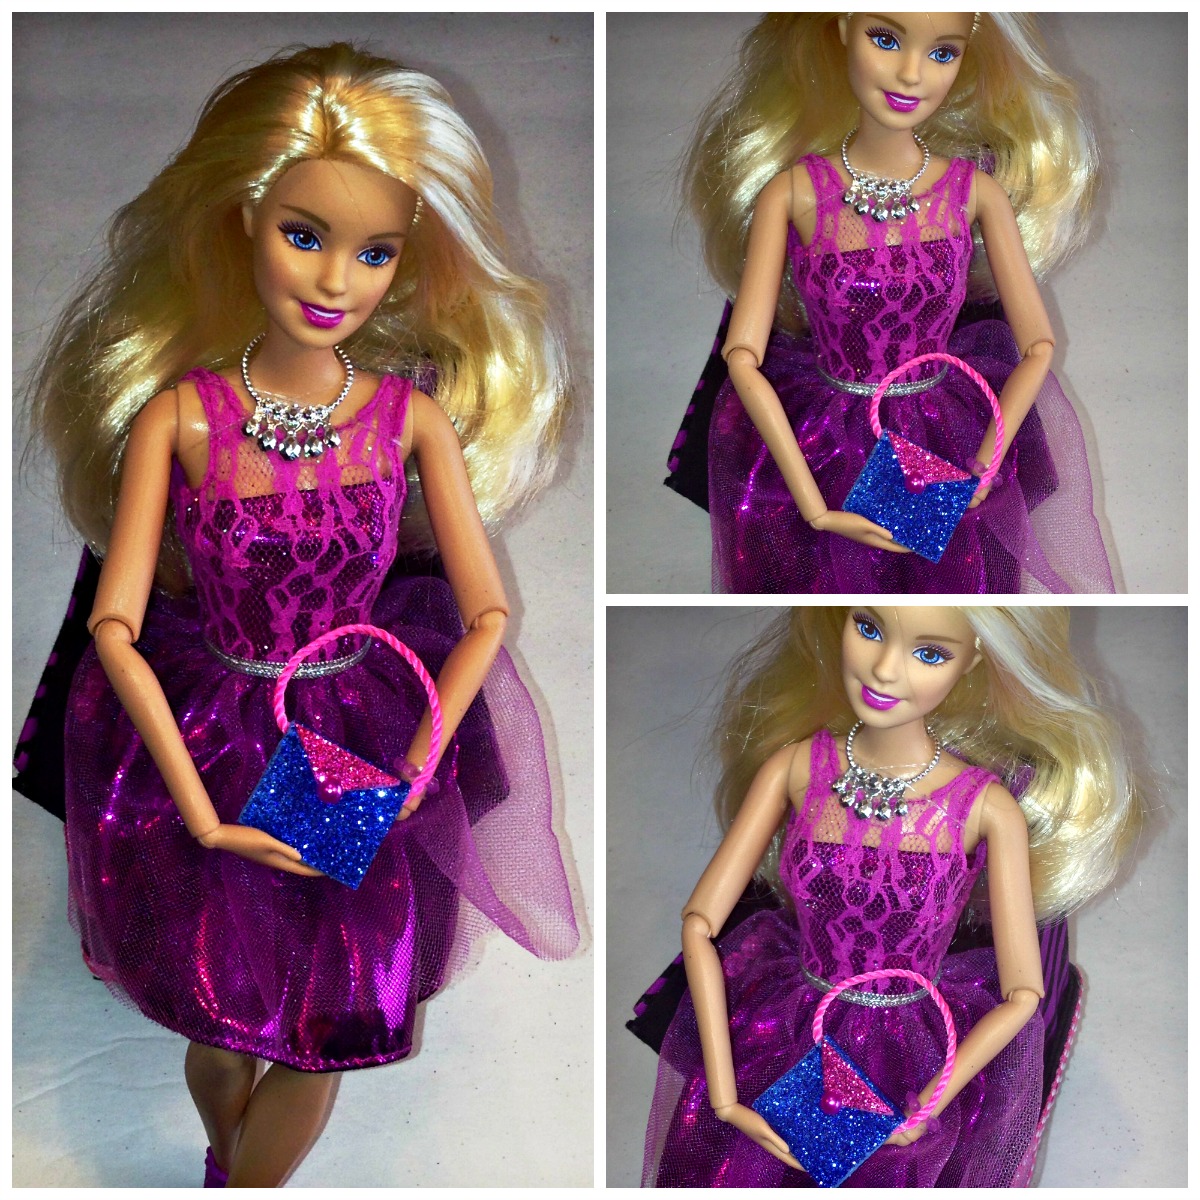 Easy DIY sparkly Barbie Doll purses made with sticky back sparkling foam from dollar store DIY Barbie Doll Easy NoSew Hand Made Purses #barbiedoll #accessories #purses #handmade #sparkle #Starrcreative